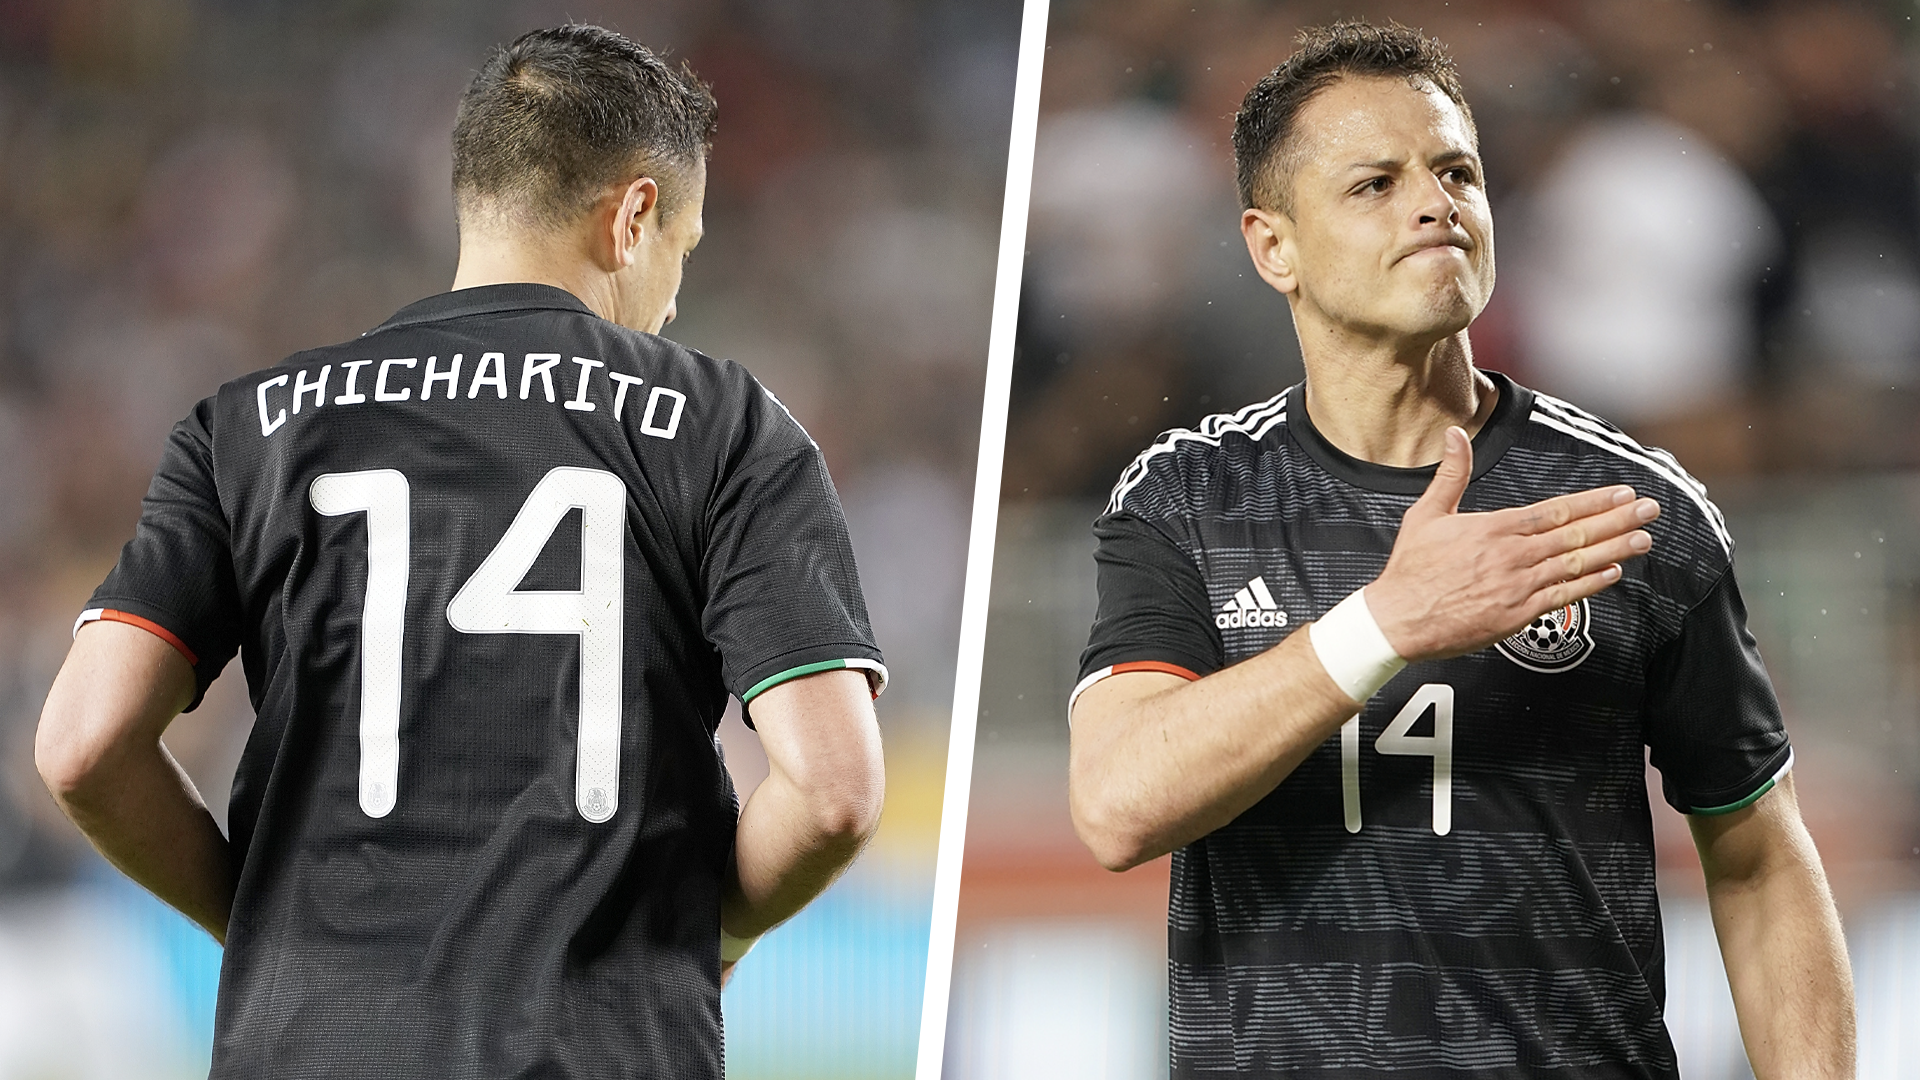 Javier Hernandez will have 'Chicharito' on back of No 14 shirt